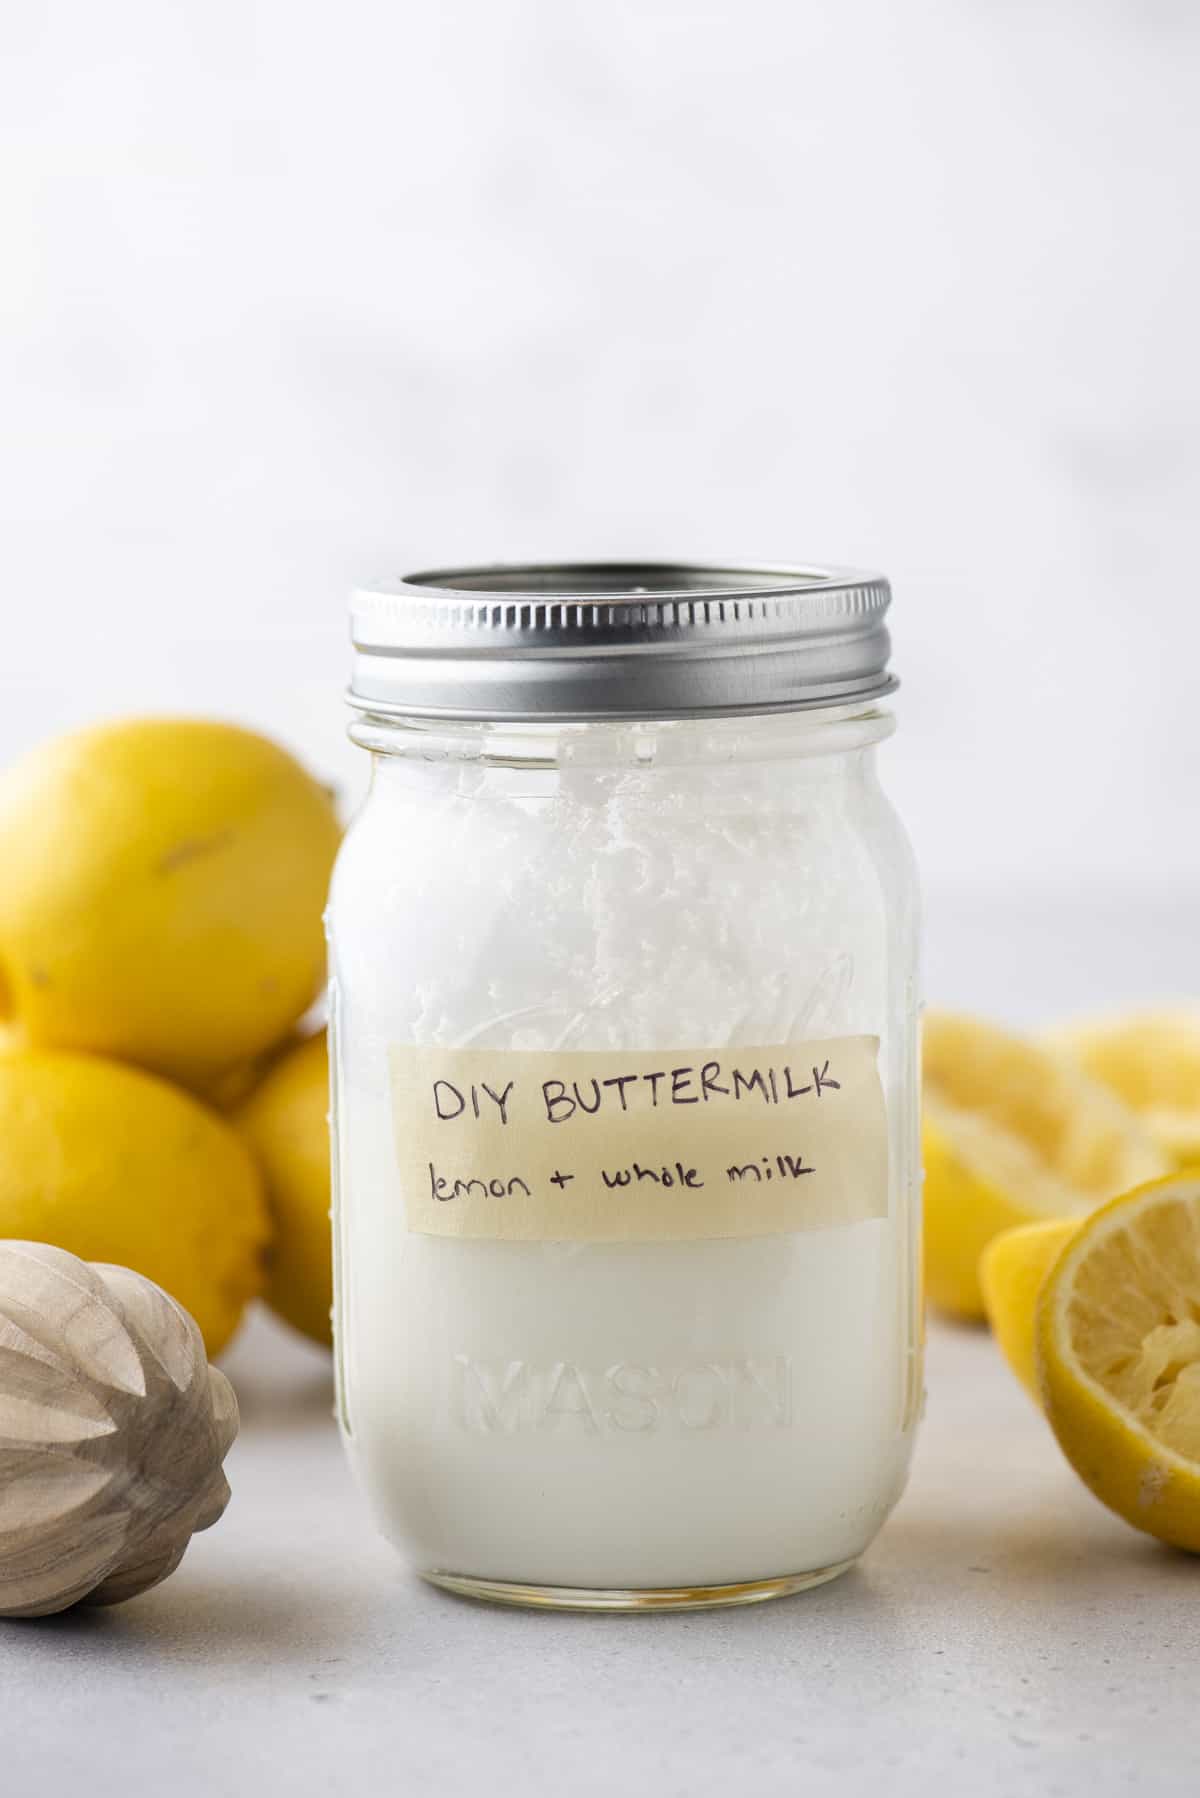 a mason jar full of buttermilk with a strip of tape on it labeled "DIY Buttermilk: lemon + whole milk", with fresh lemons all around